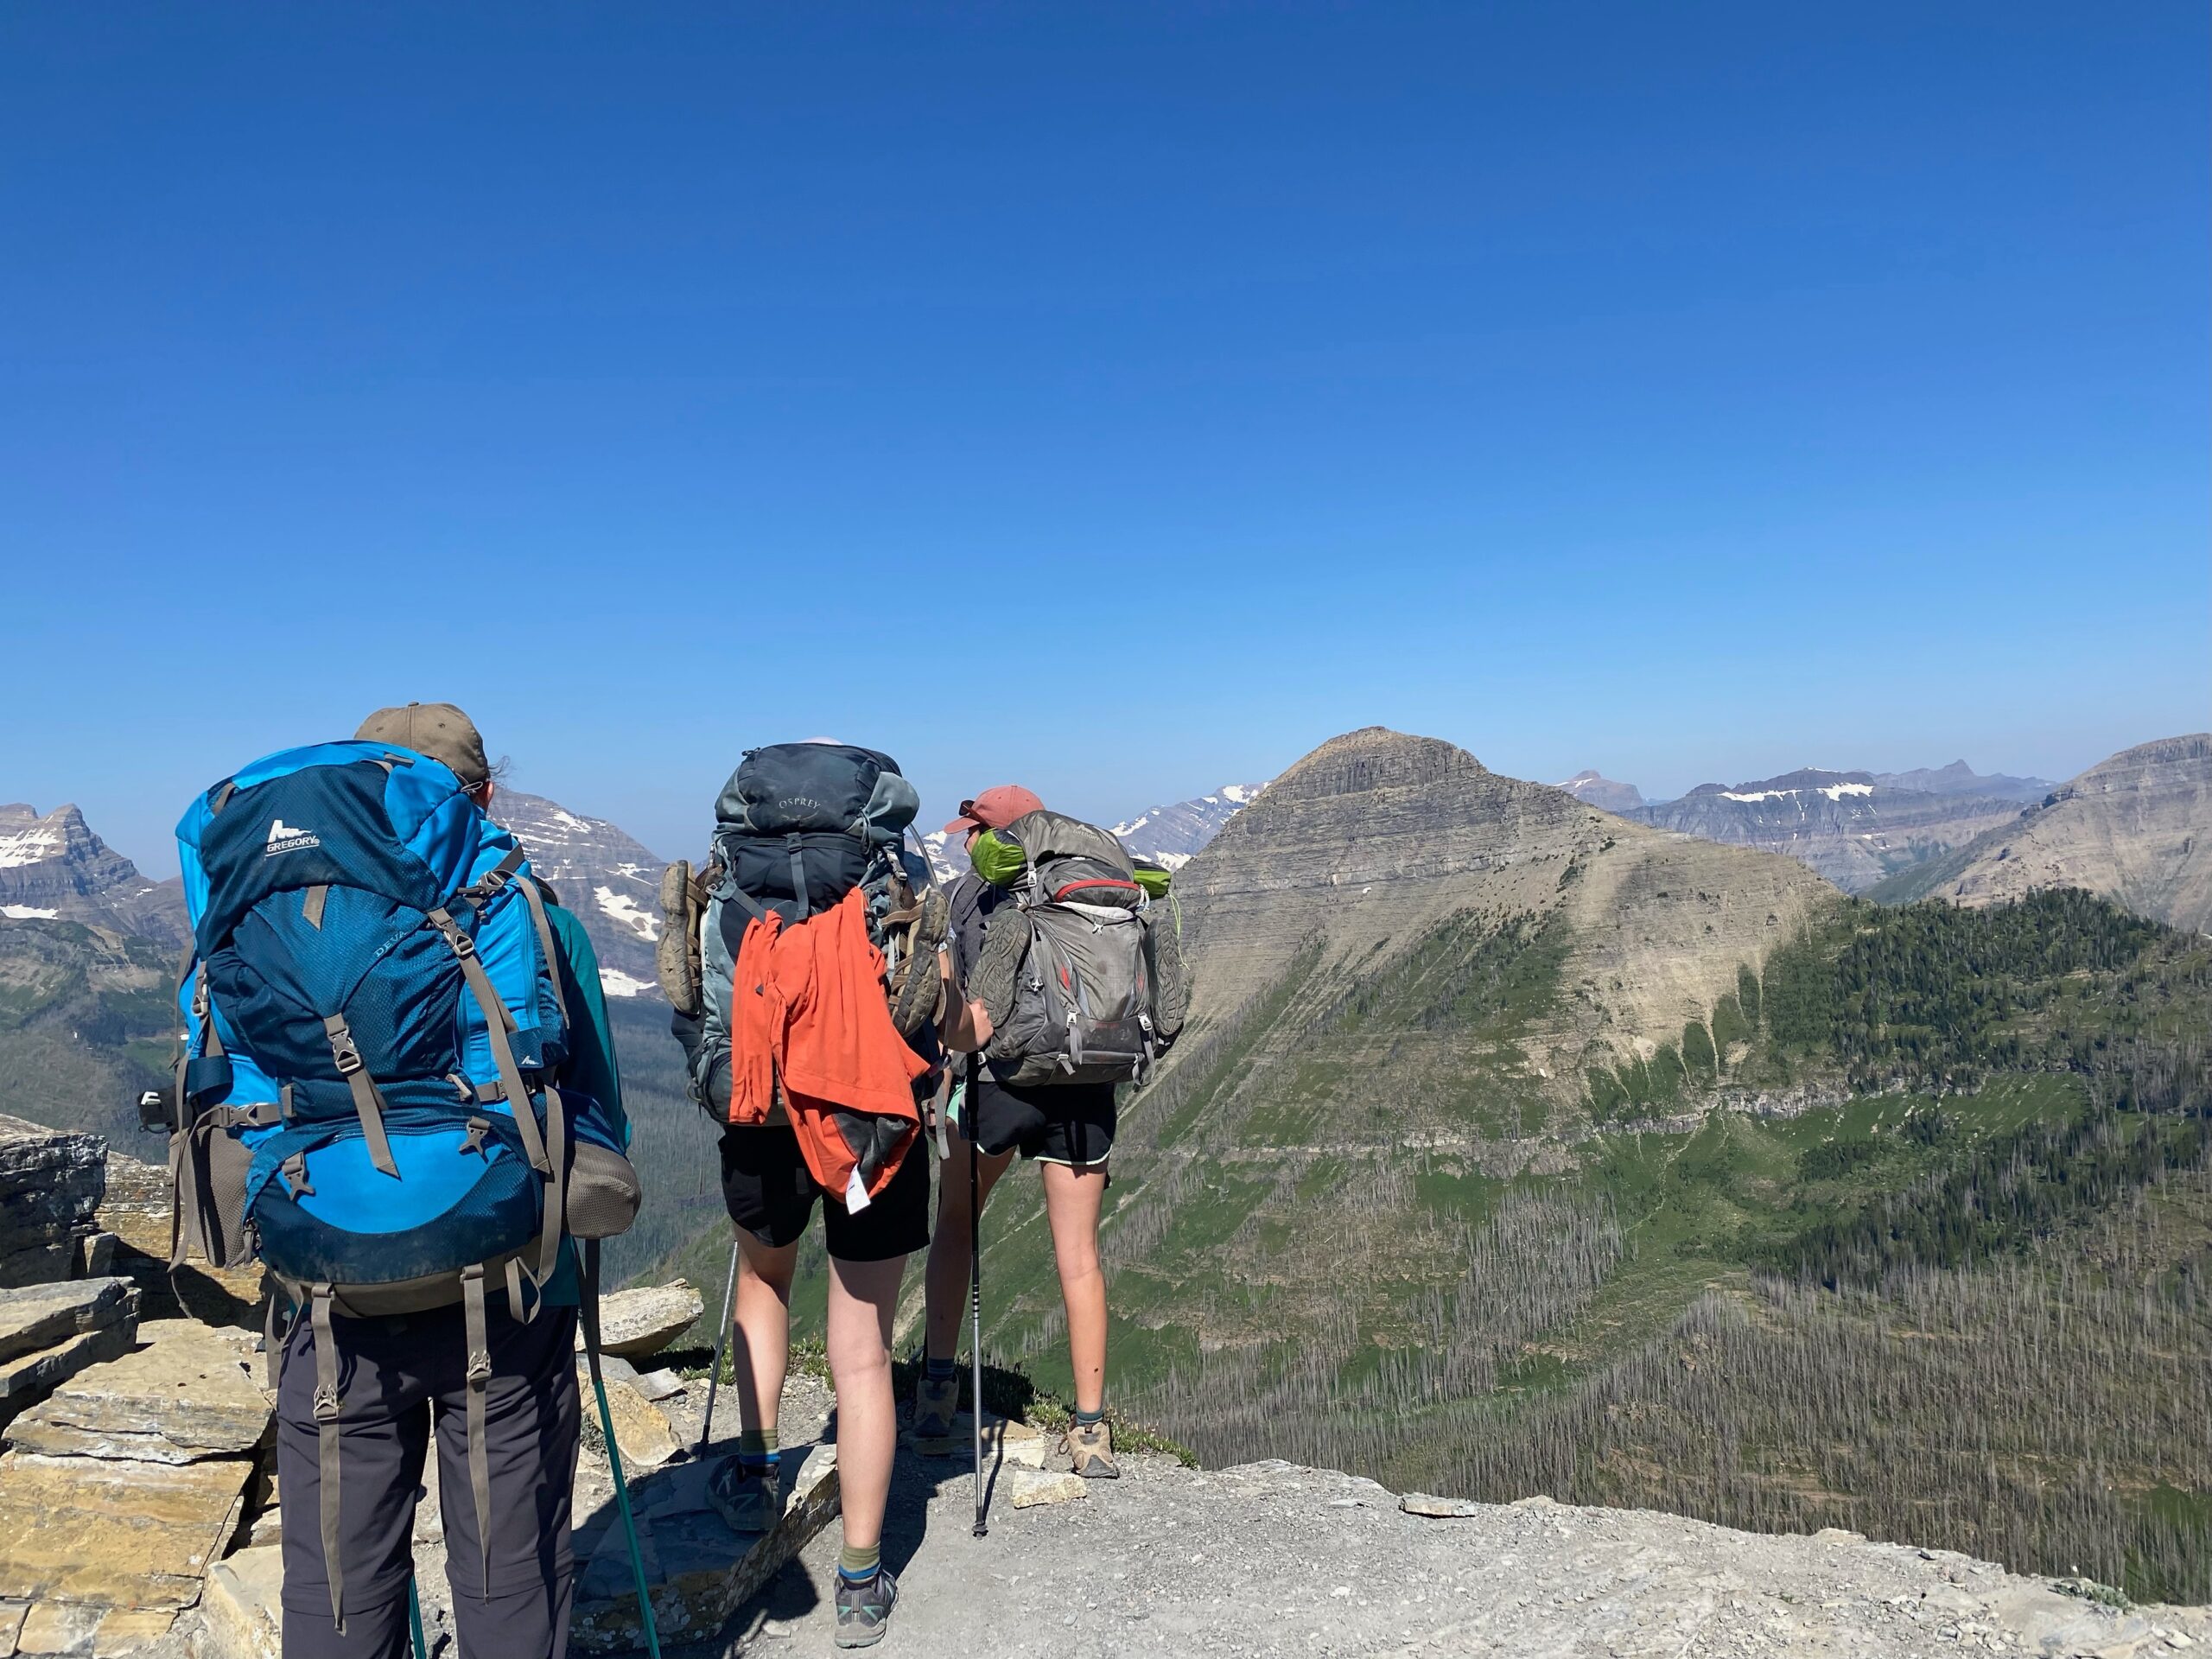 three backpackers on a hiking trail in Montana wilderness